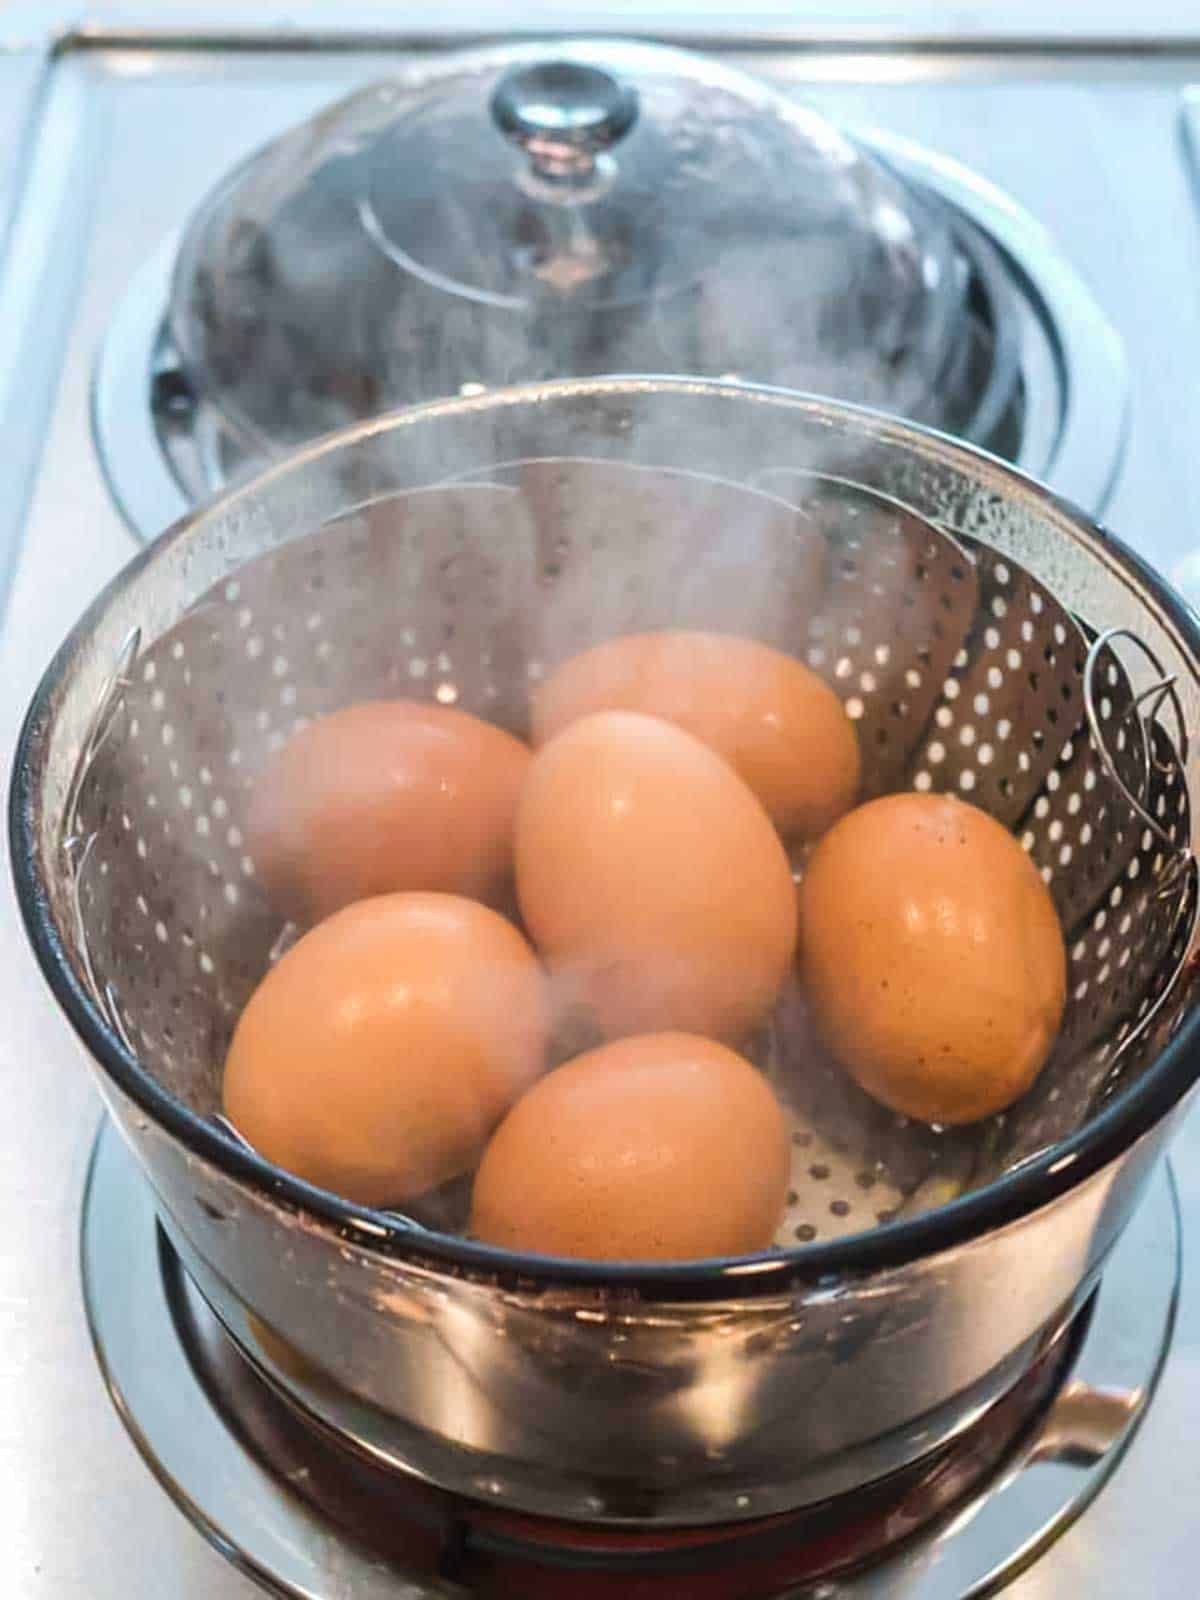 Eggs in a steamer basked on the stove.